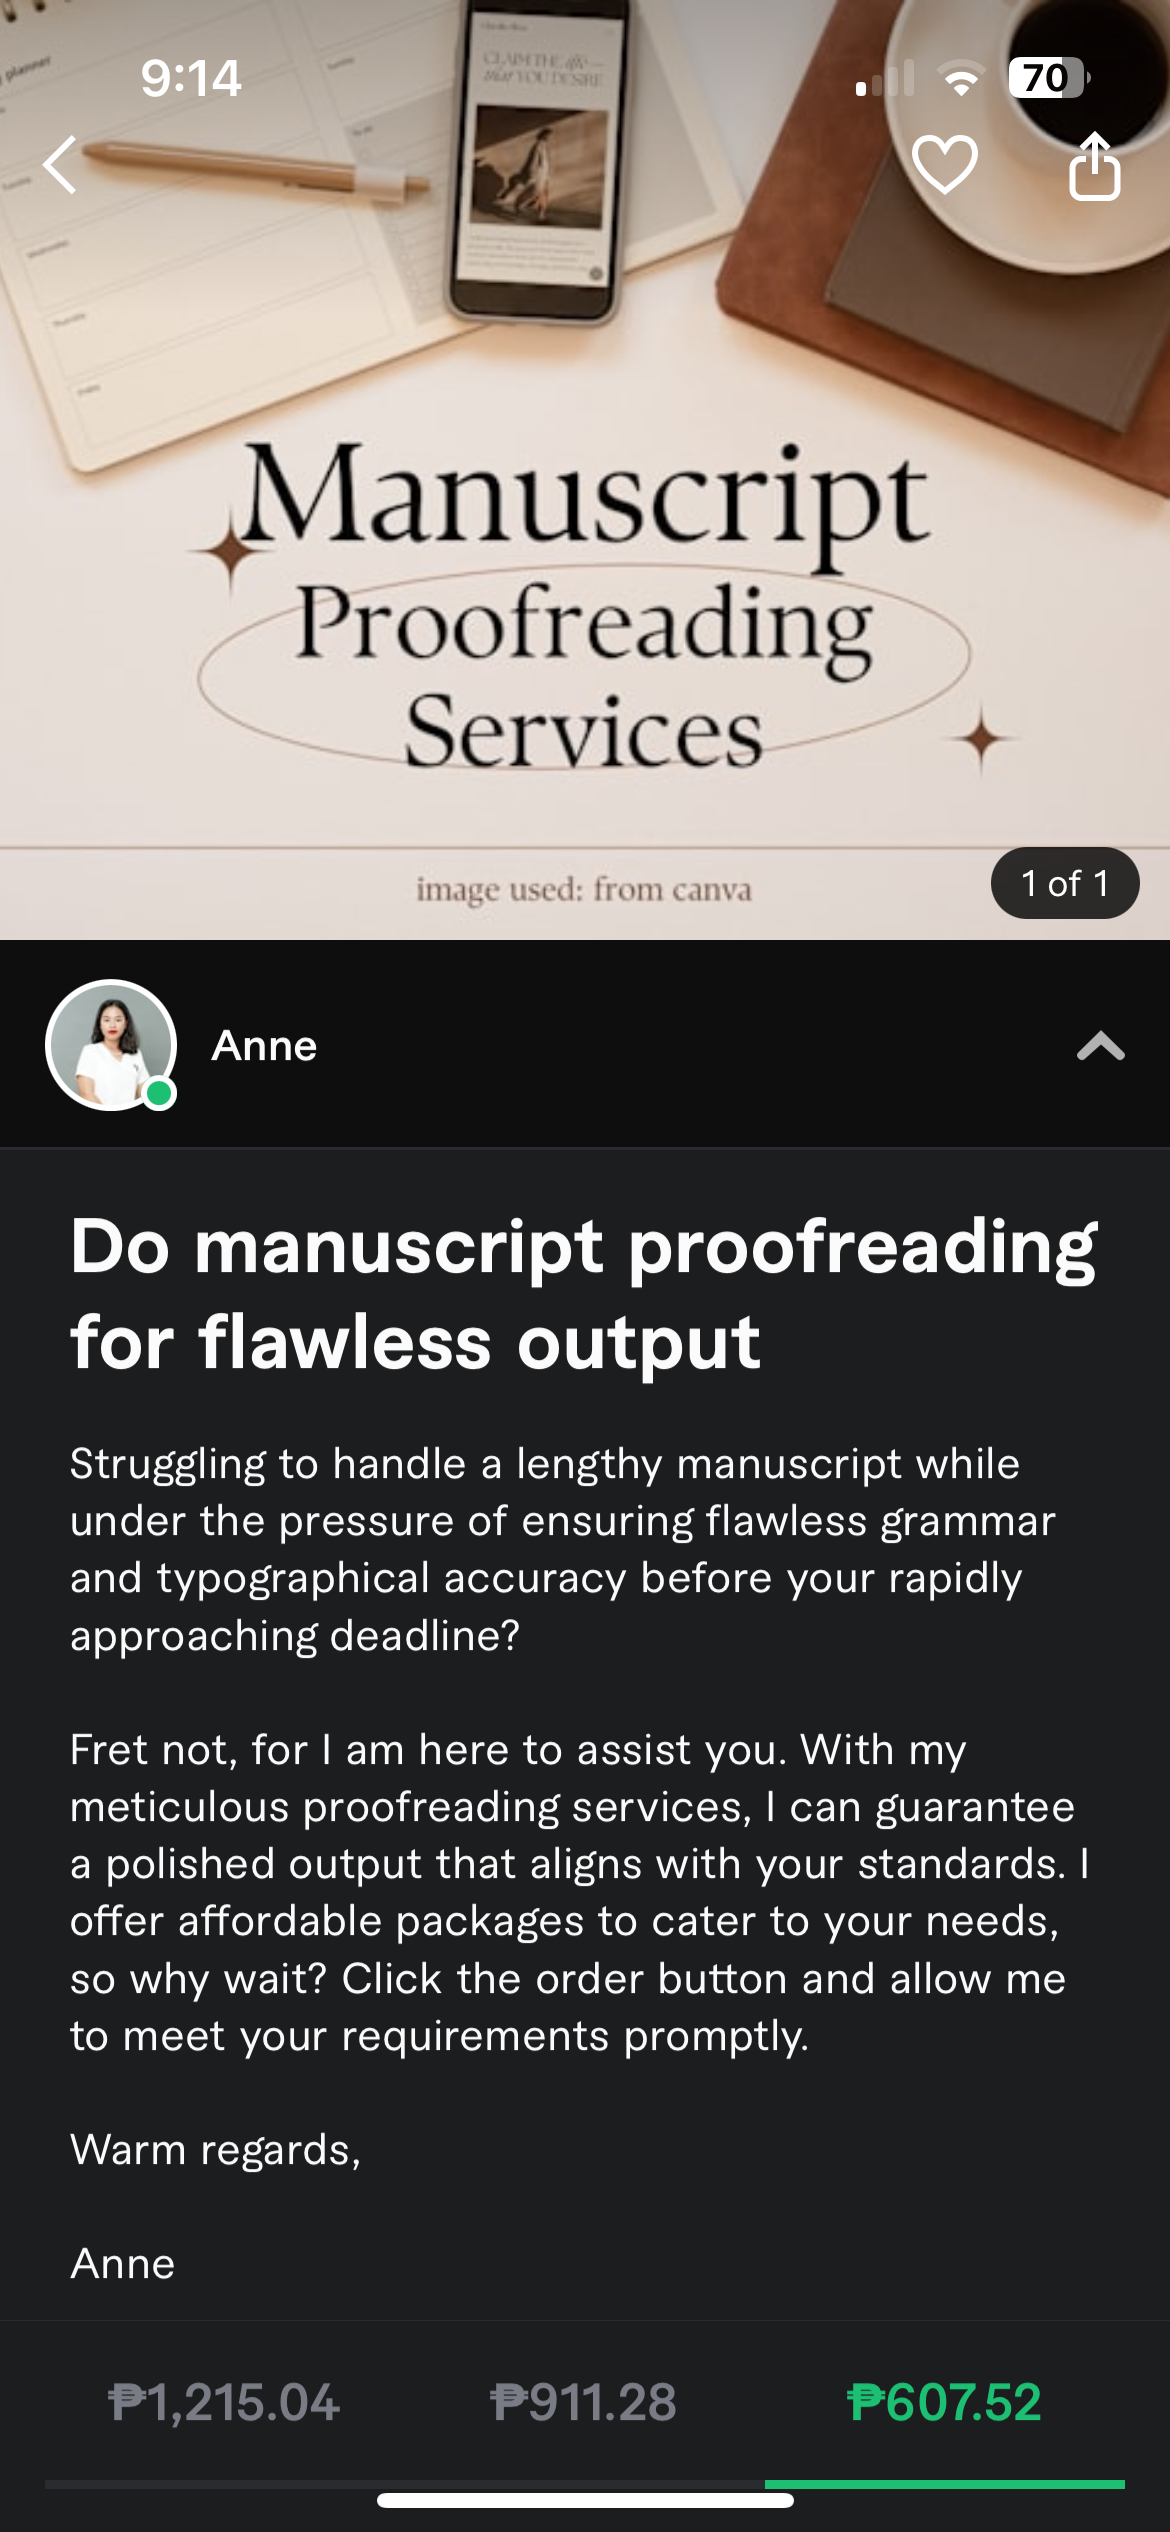 Manuscript proofreading for flawless output